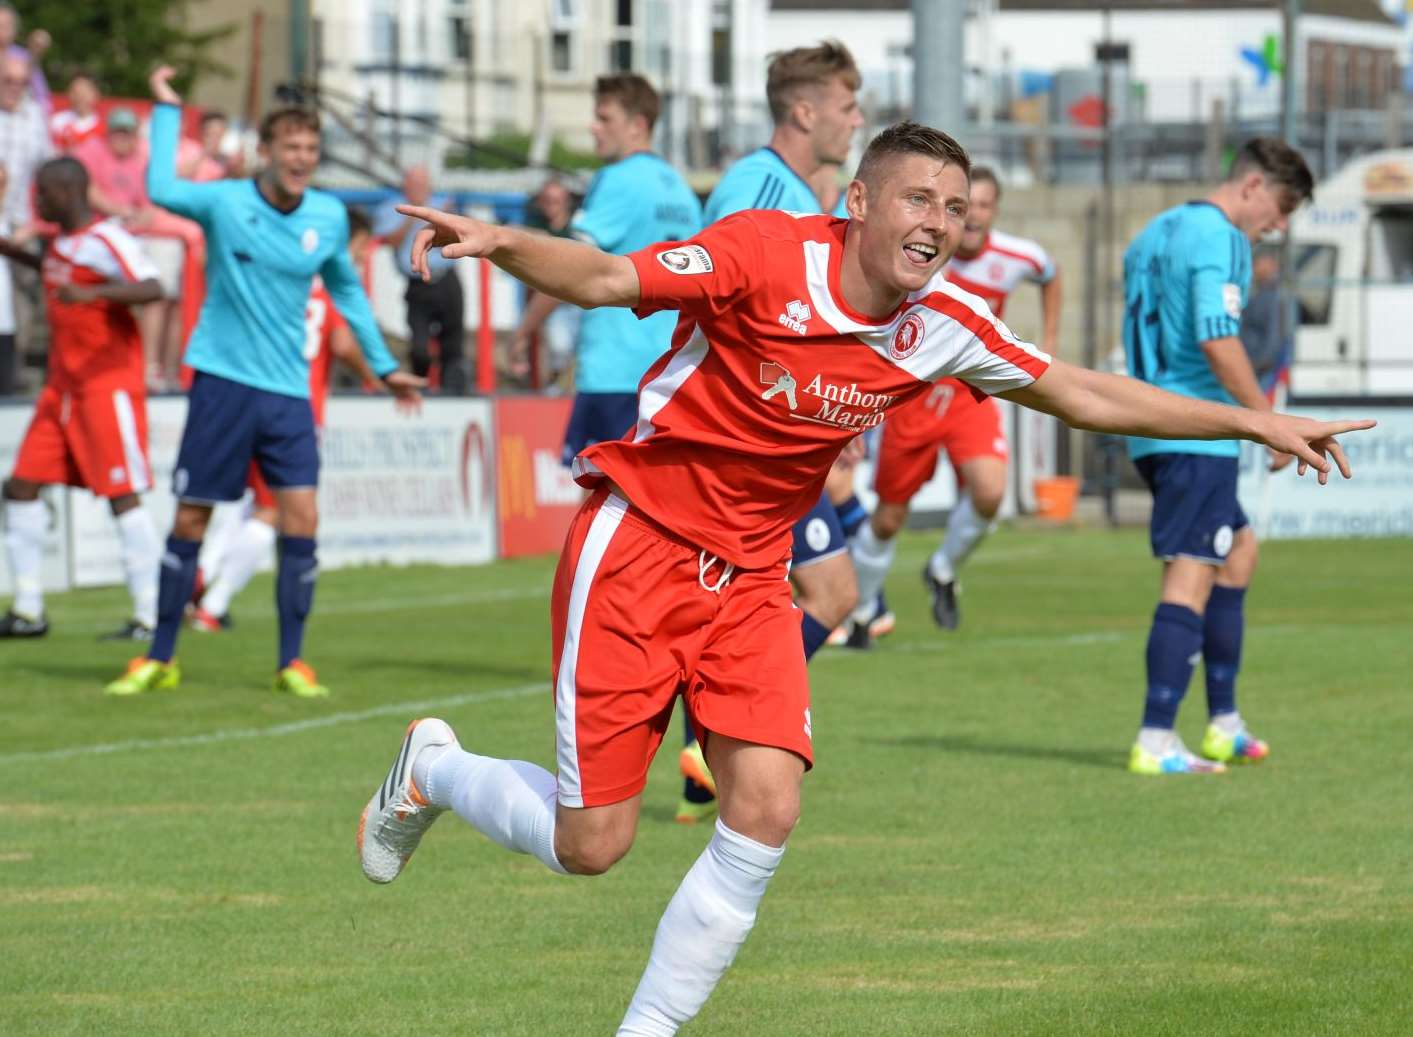 Welling's Harry Beautyman celebrates his opening day goal against Telford. Picture: Keith Gillard